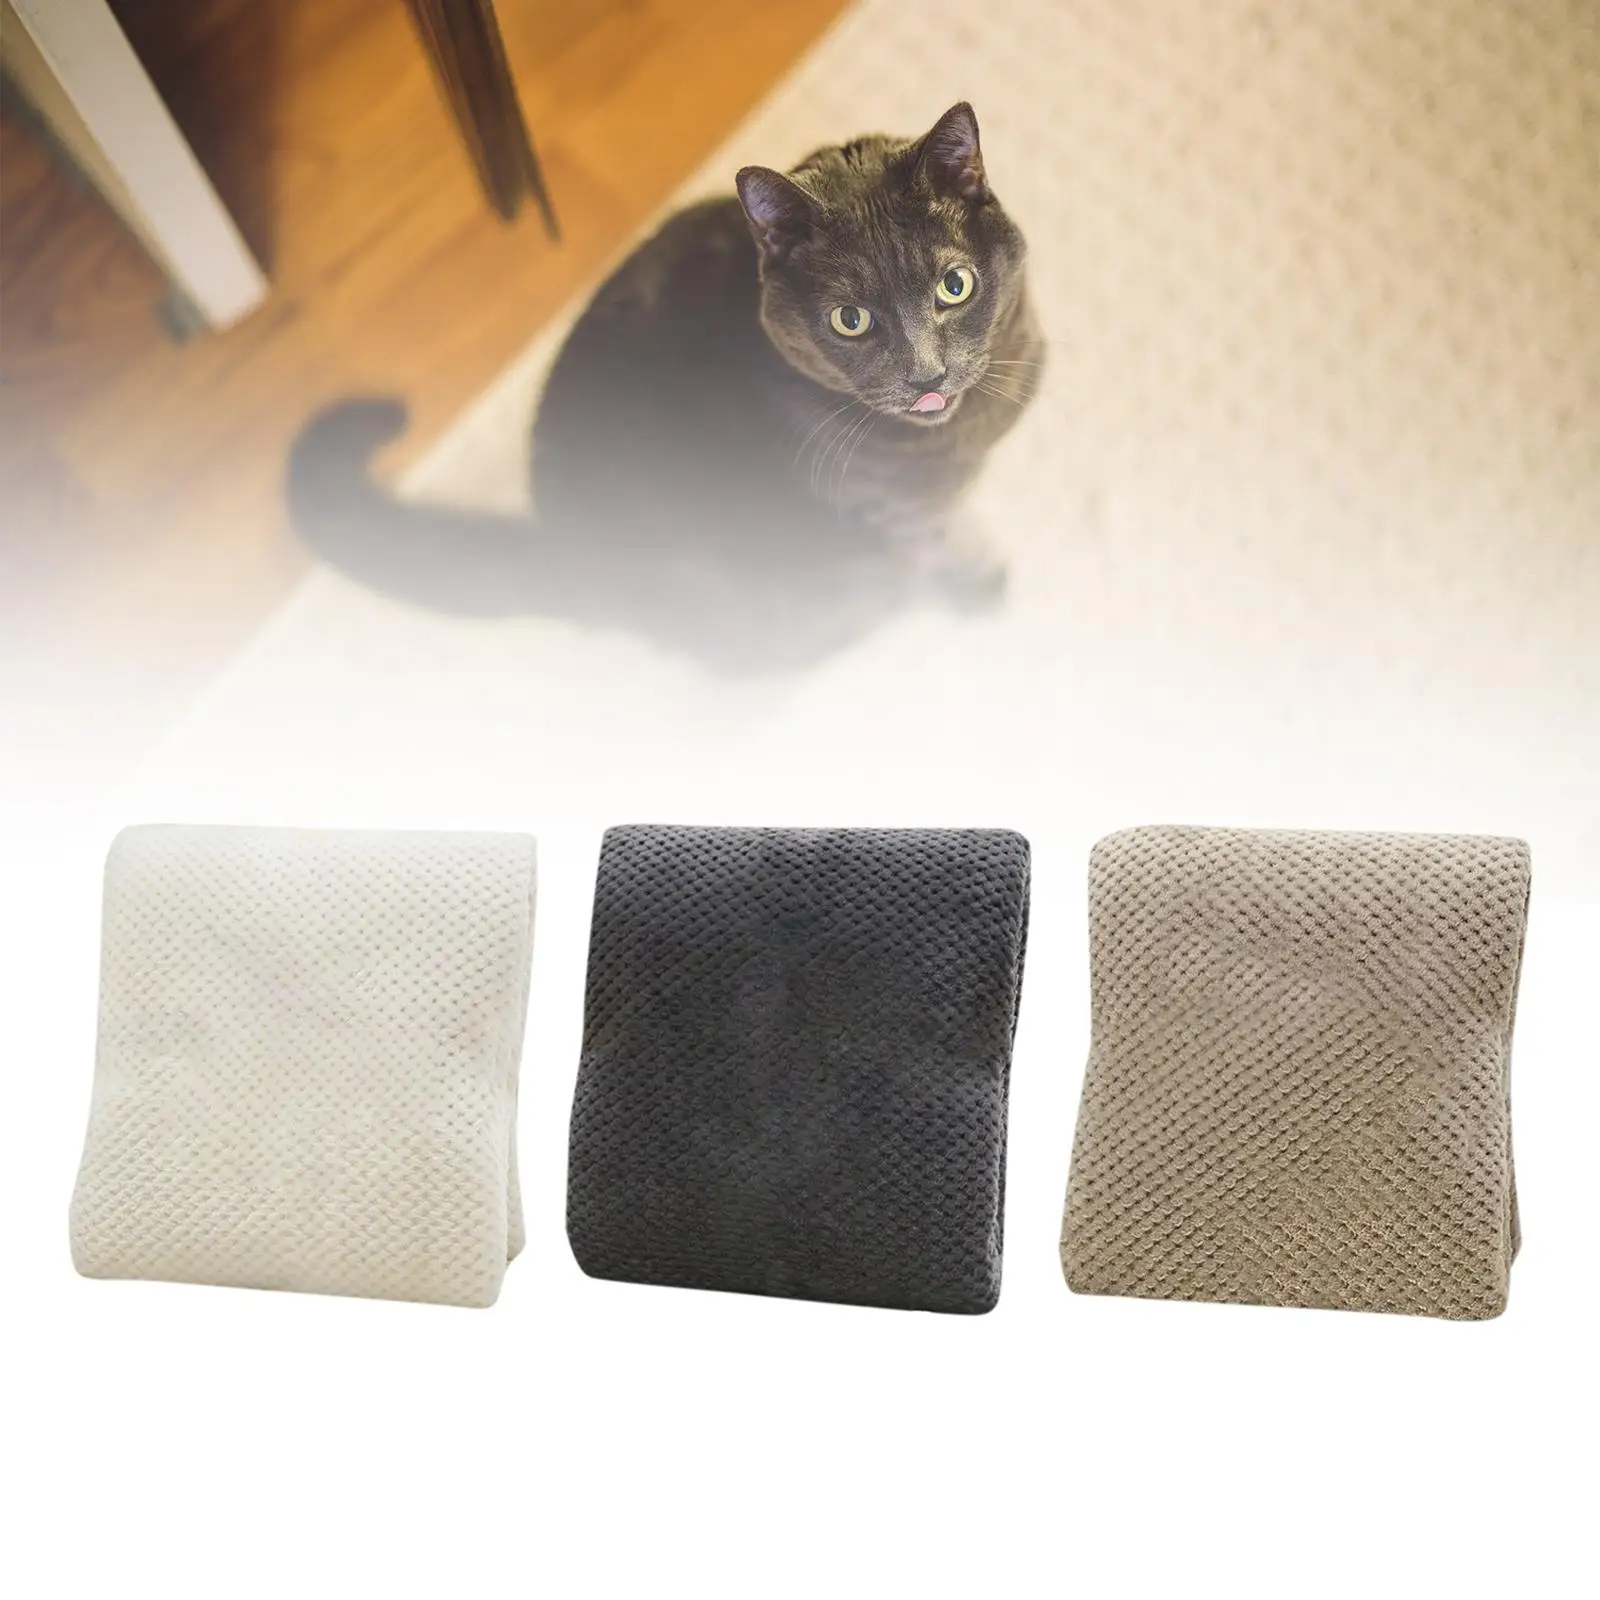 Warm Pet Throw Blanket Home Doggy Flannel Lightweight Small Medium Large Dog Bed Mat Cushion for Winter Adult Crate Cat Bed